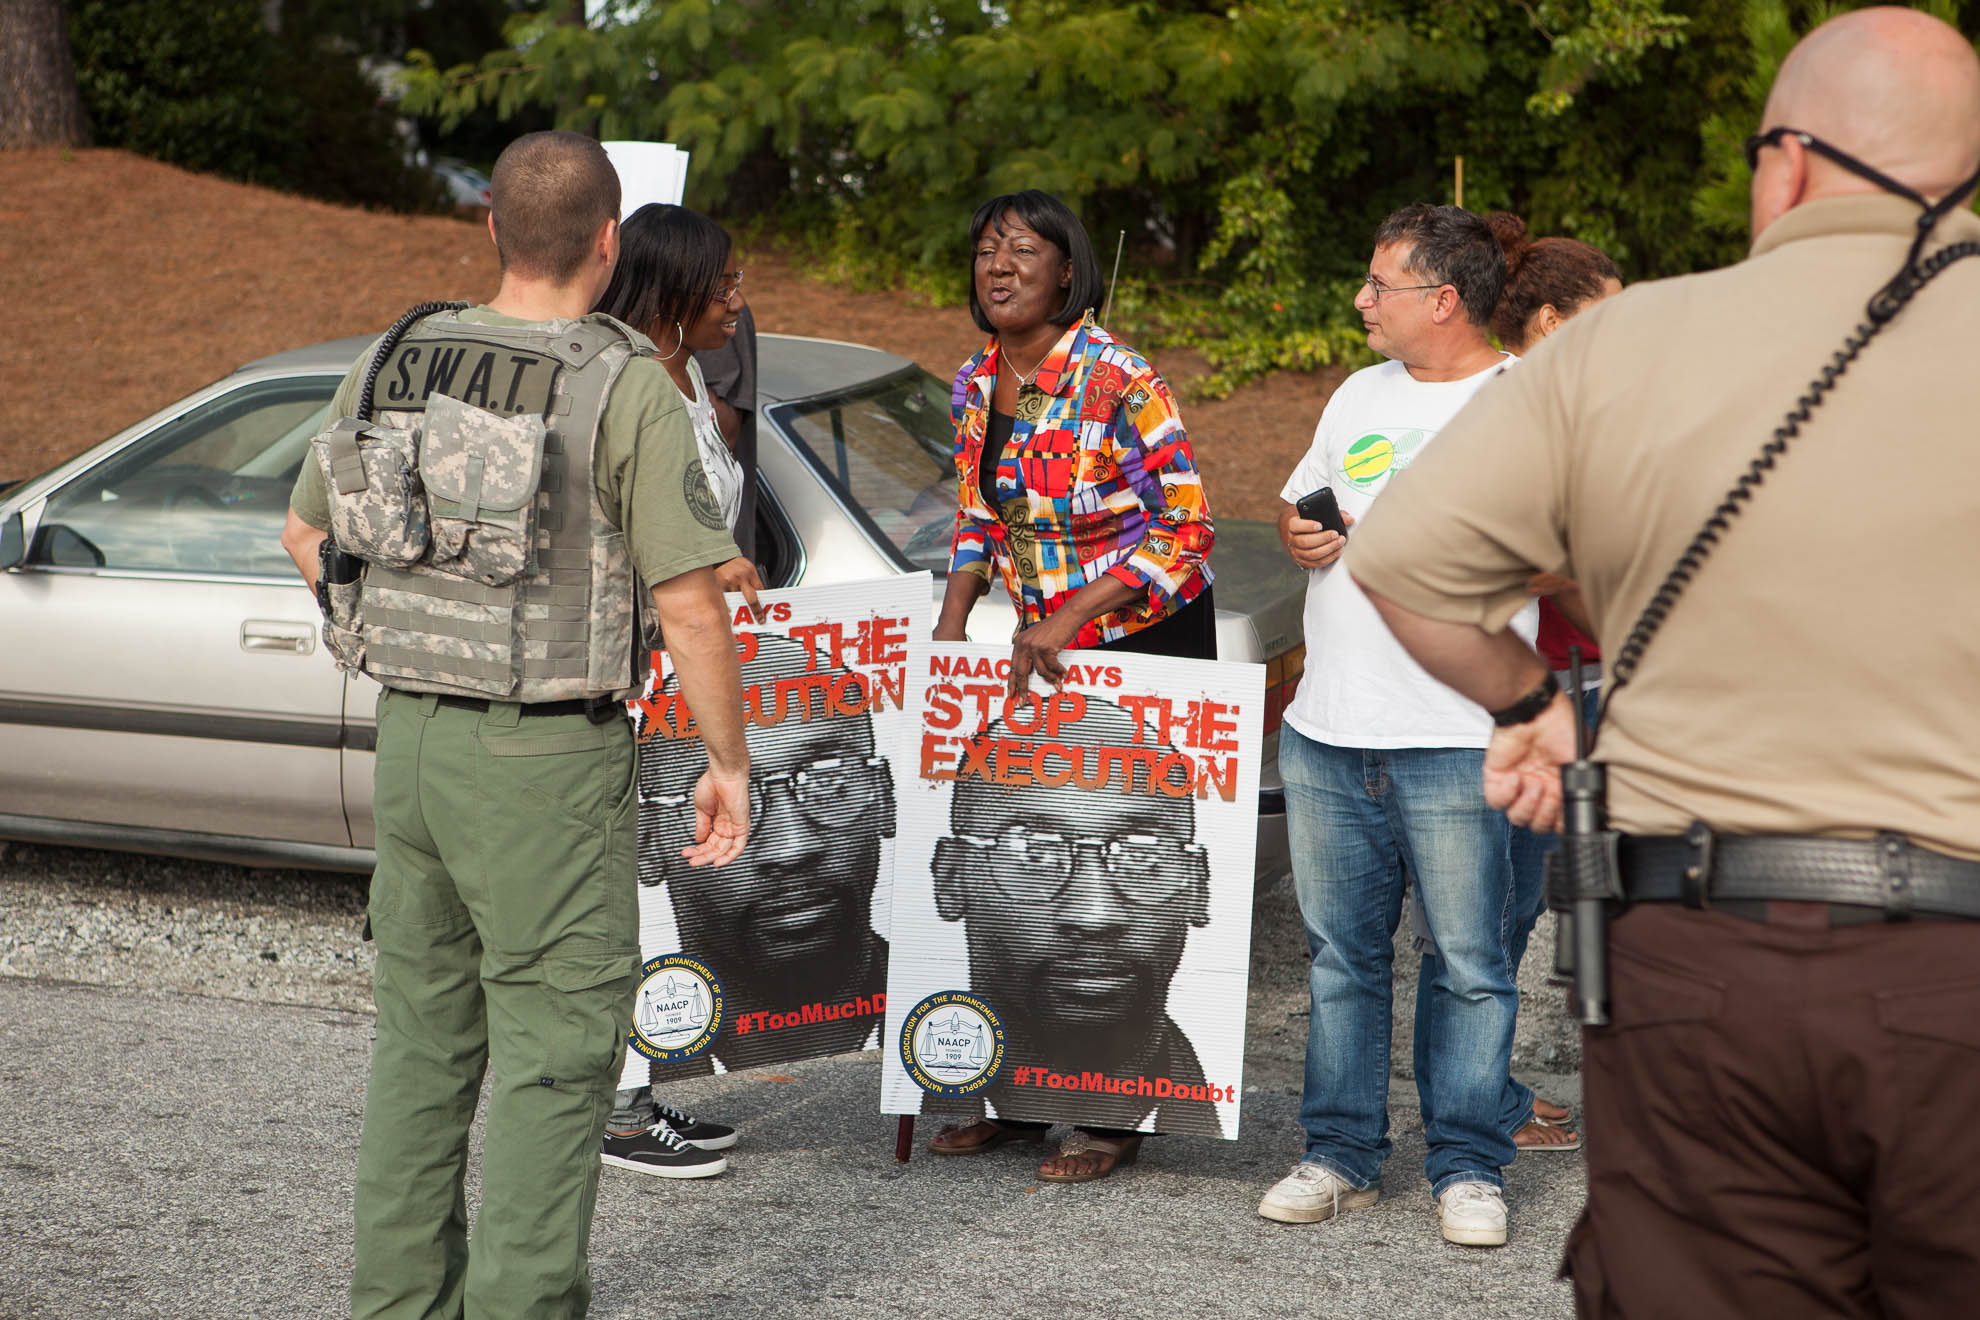 Protests and vigils in the execution of Troy Davis in Georgia - a death penalty innocence case.